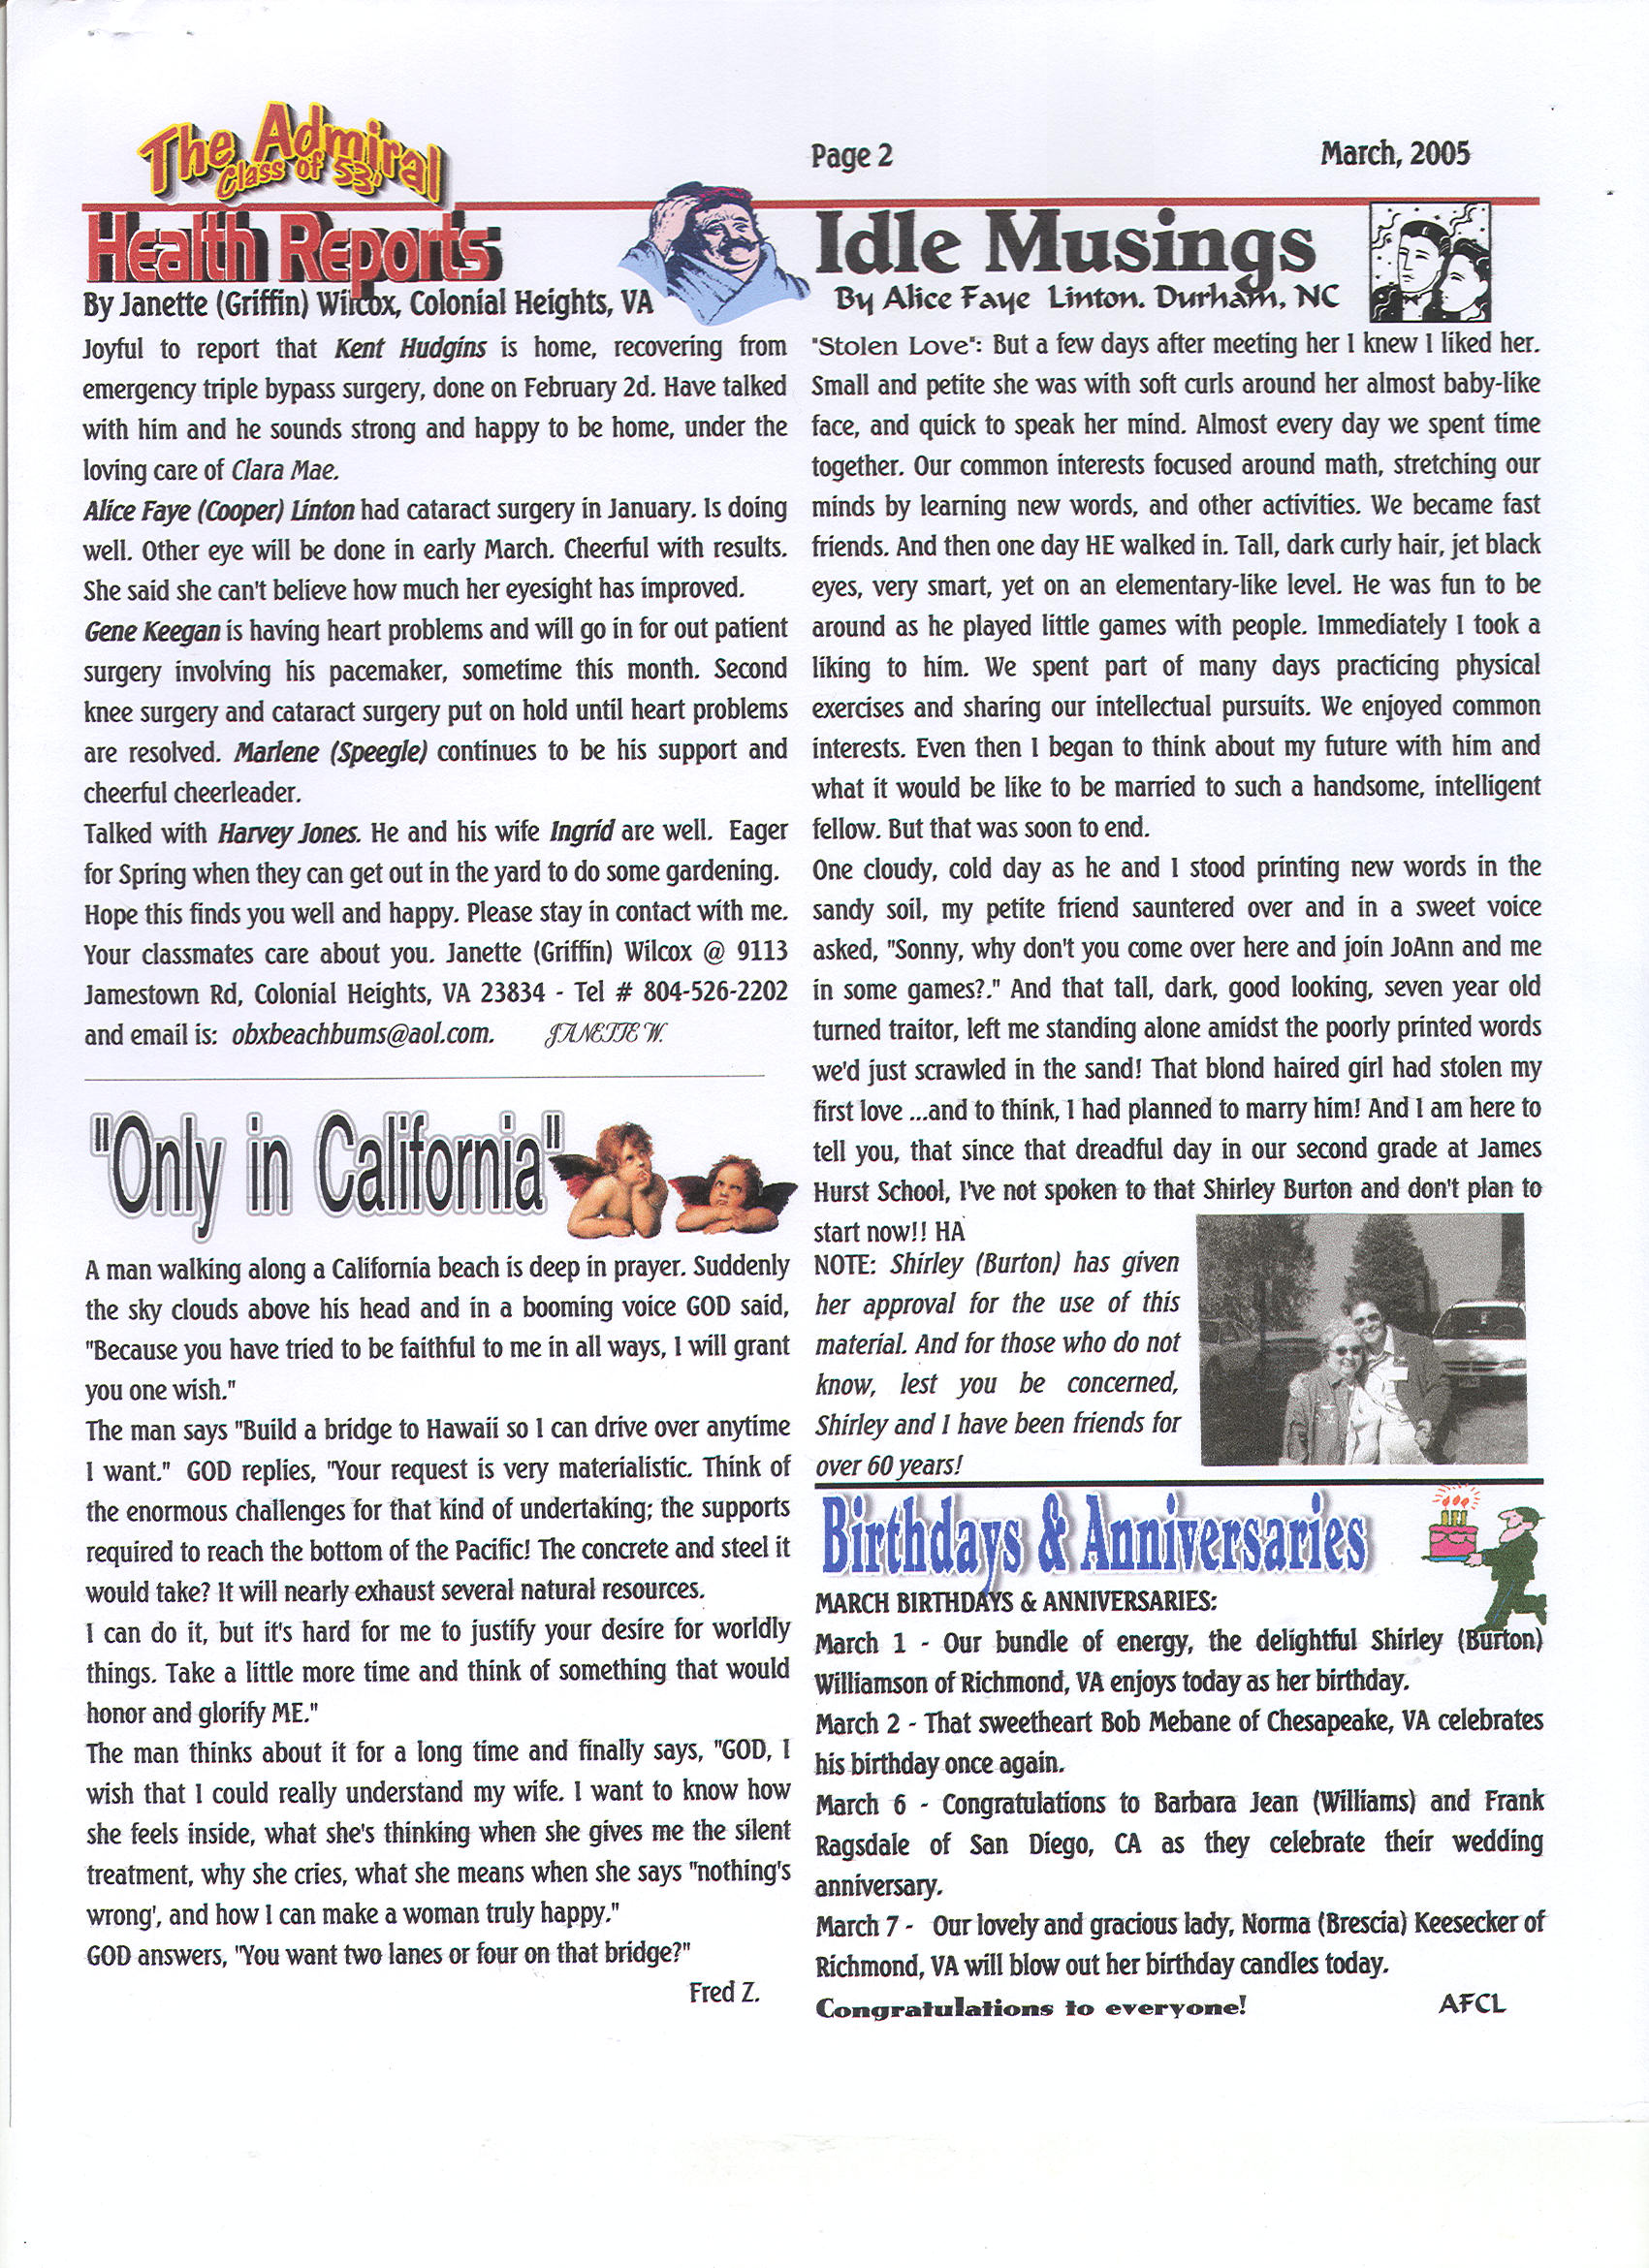 The Admiral - March 2005 - pg. 2